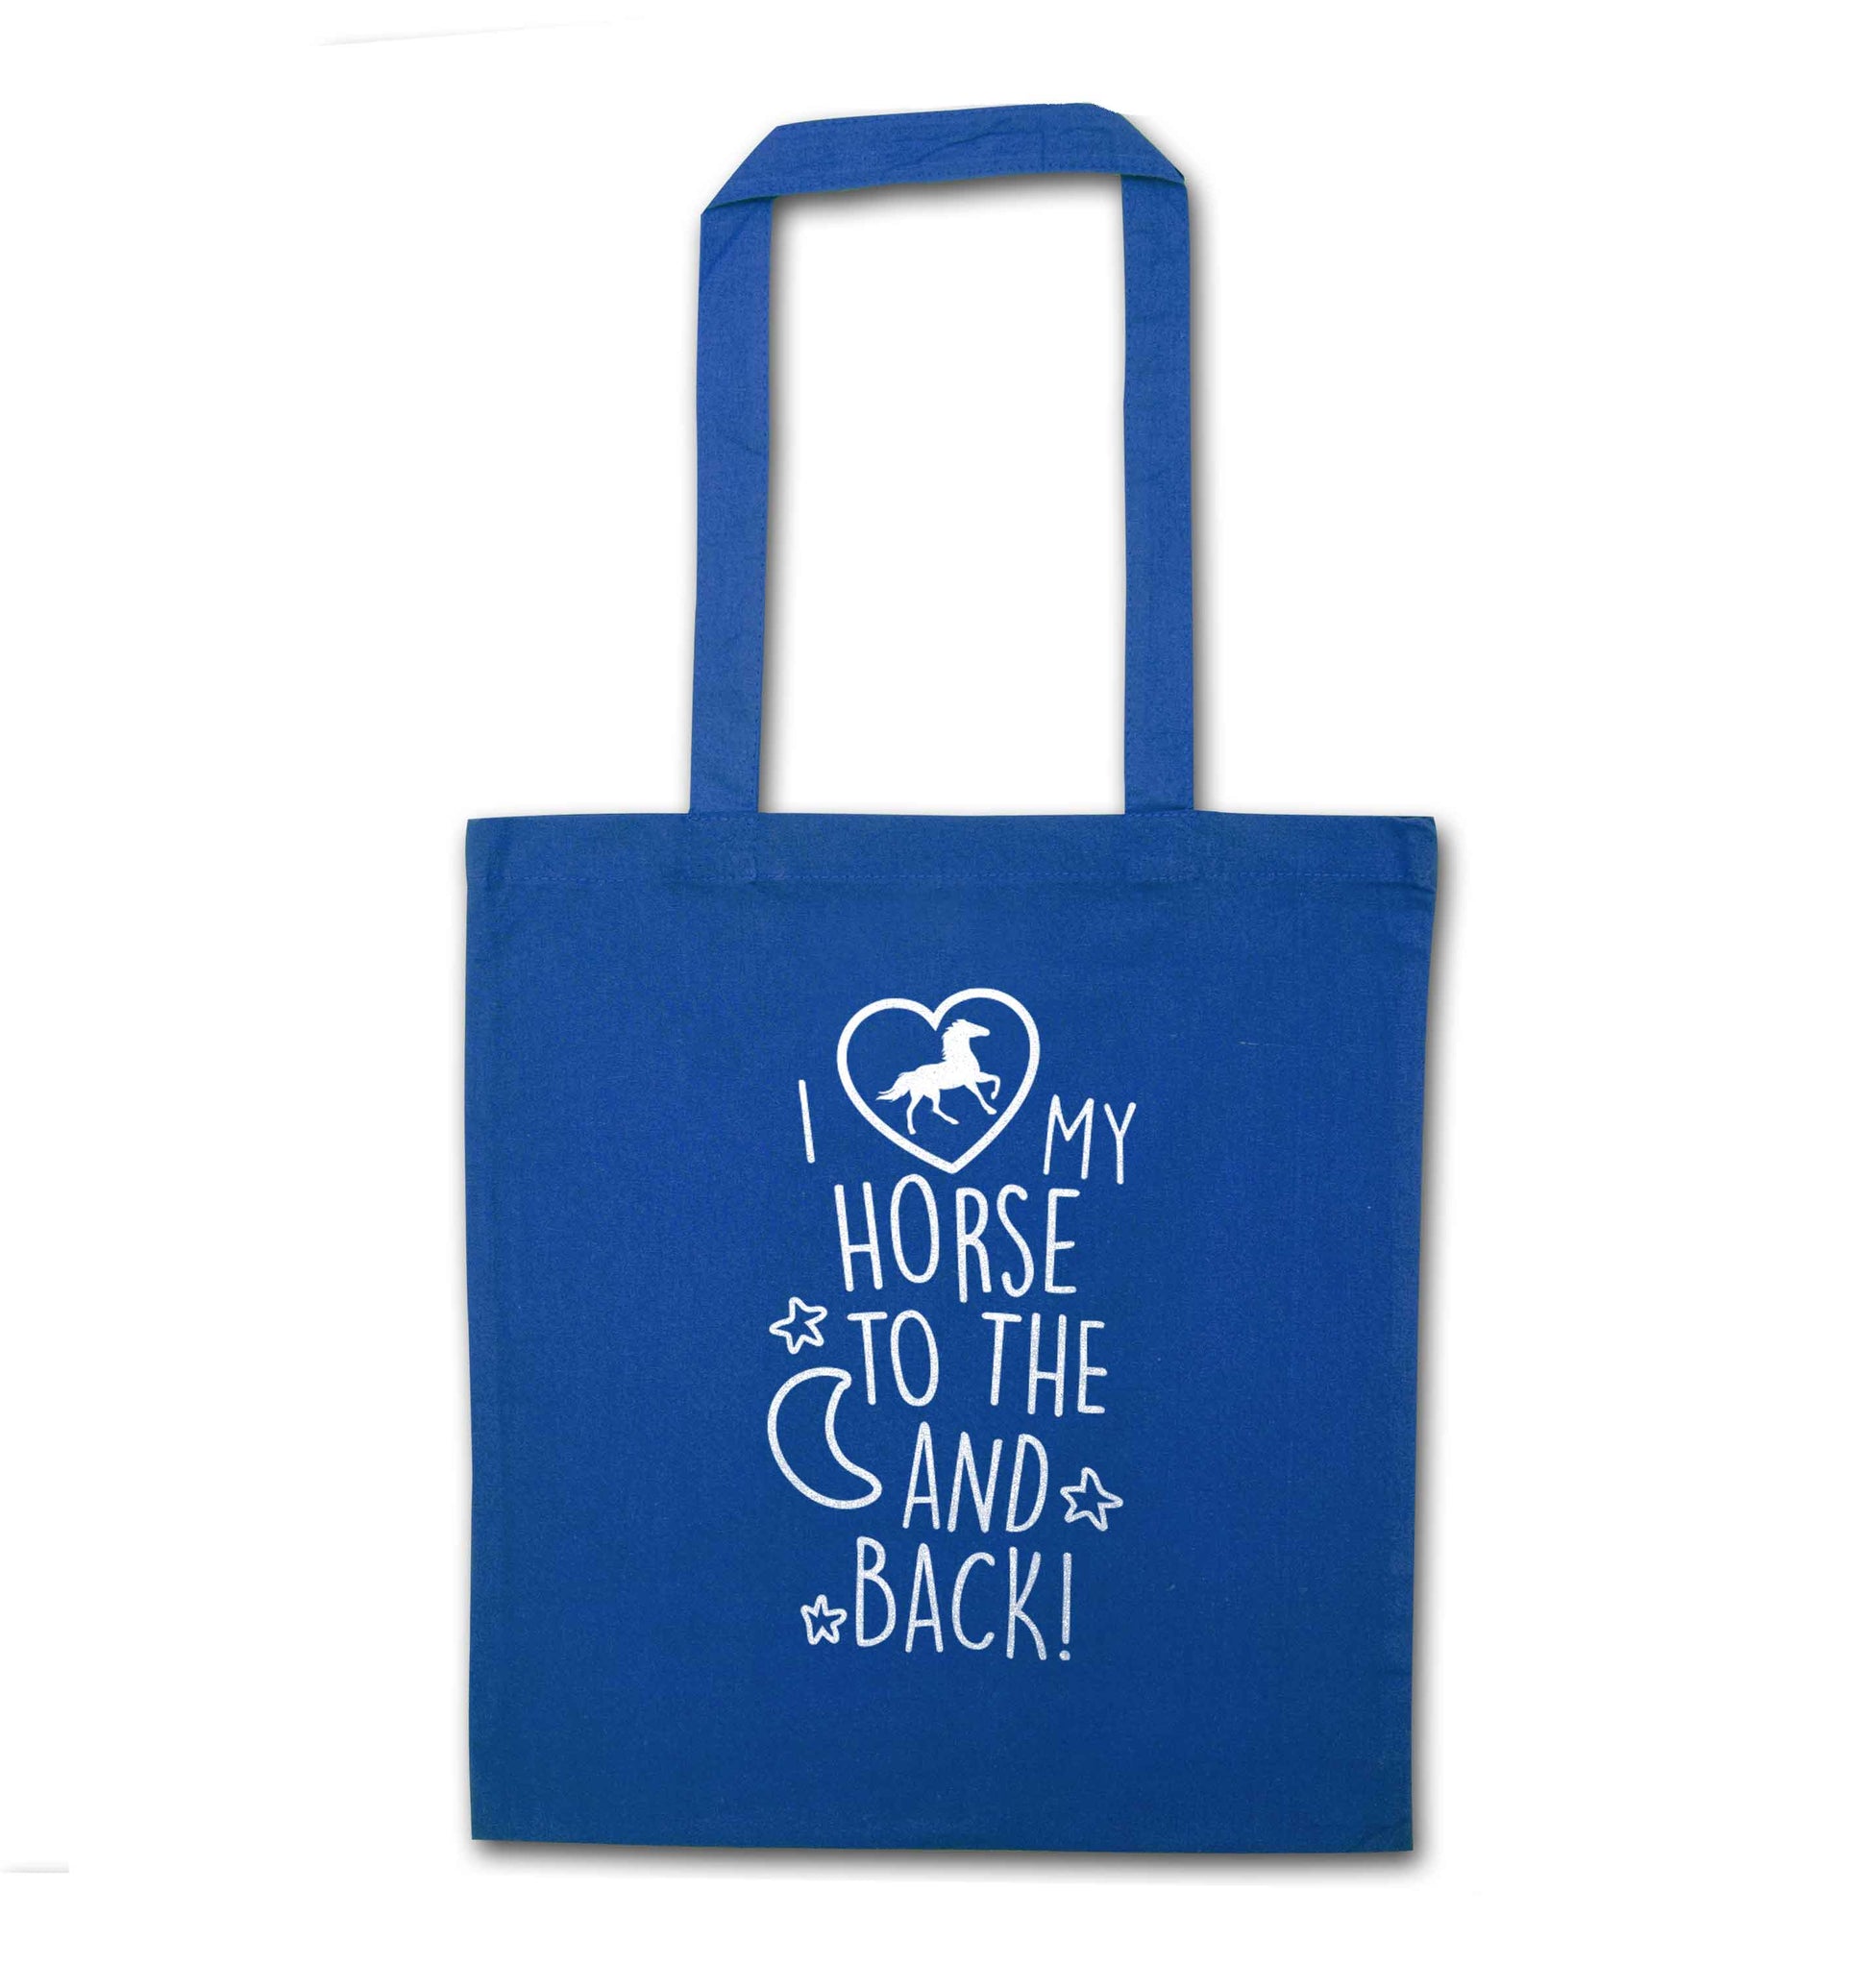 I love my horse to the moon and back blue tote bag